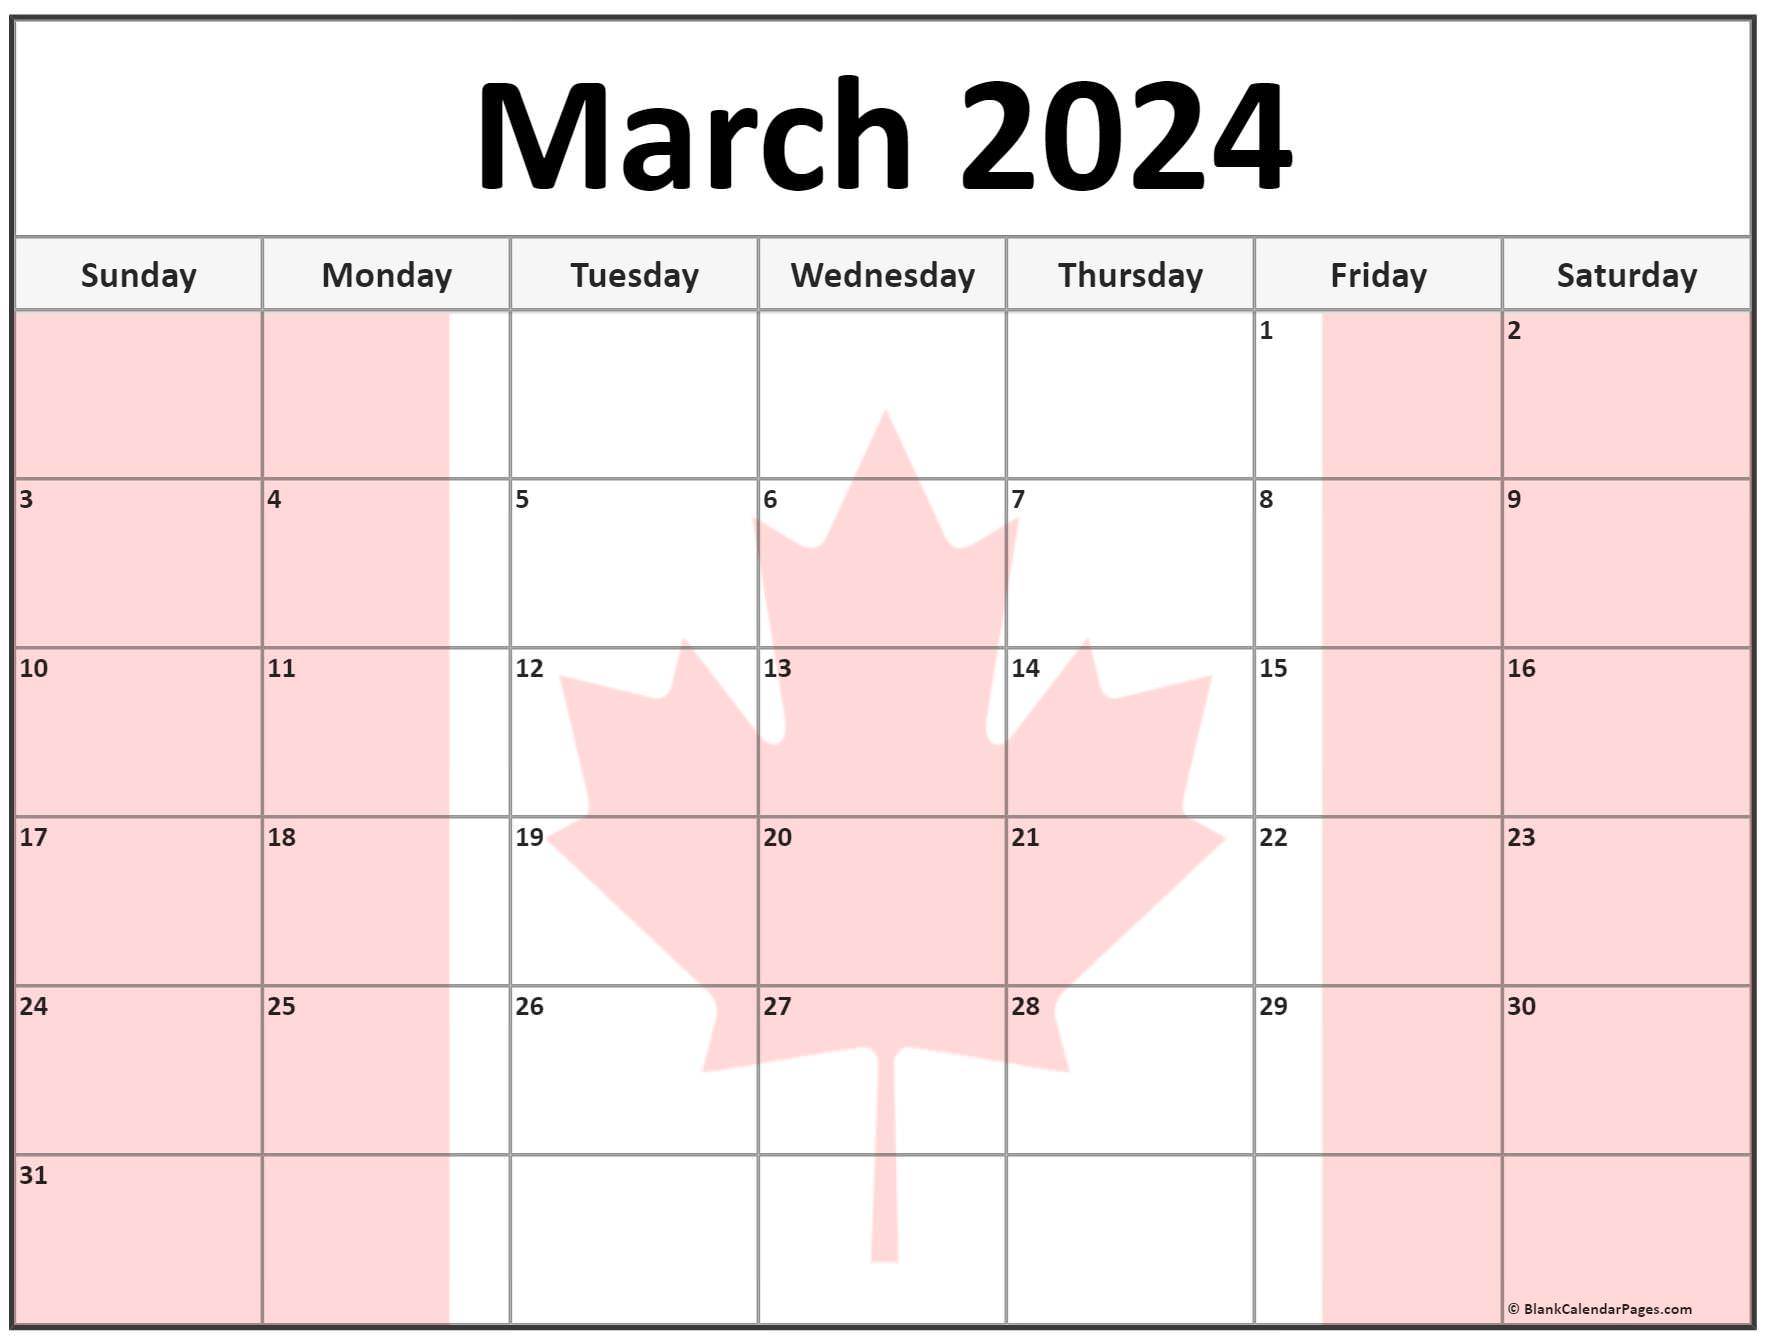 Collection of March 2024 photo calendars with image filters